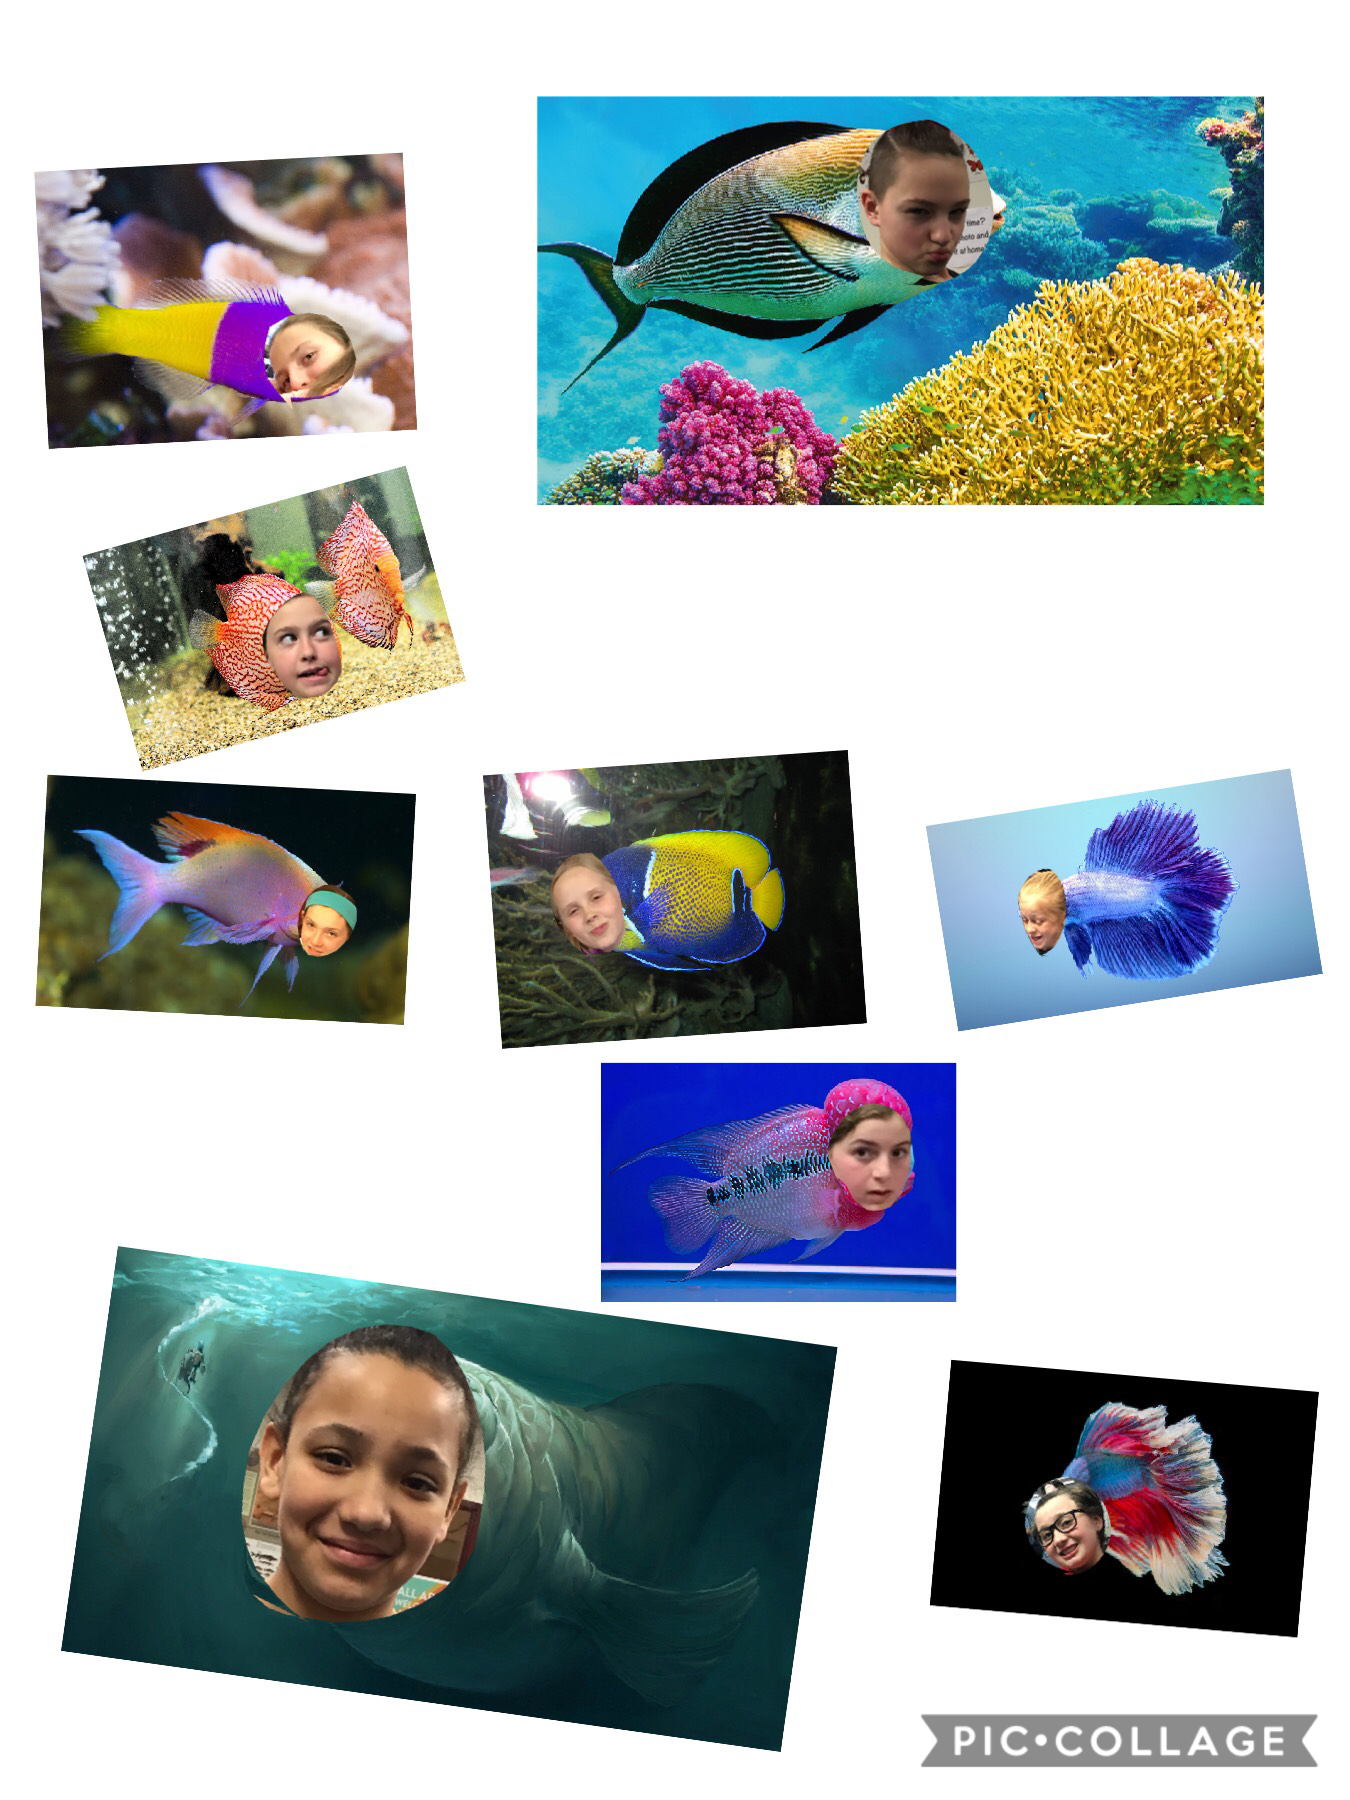 Some of my friends as fish :)